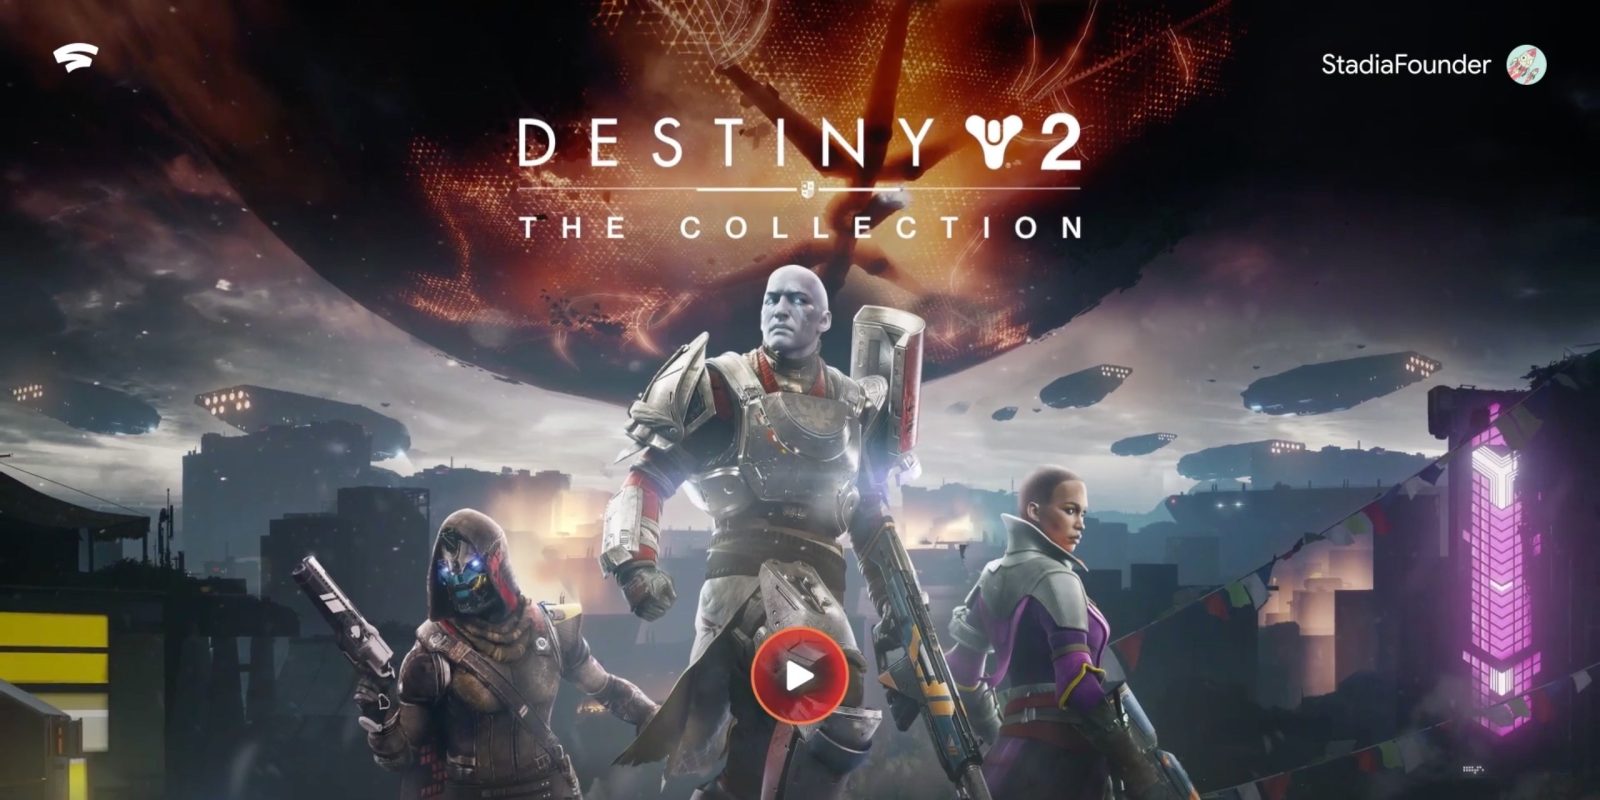 PSA: Destiny 2 is down on all platforms, not just Stadia - 9to5Google